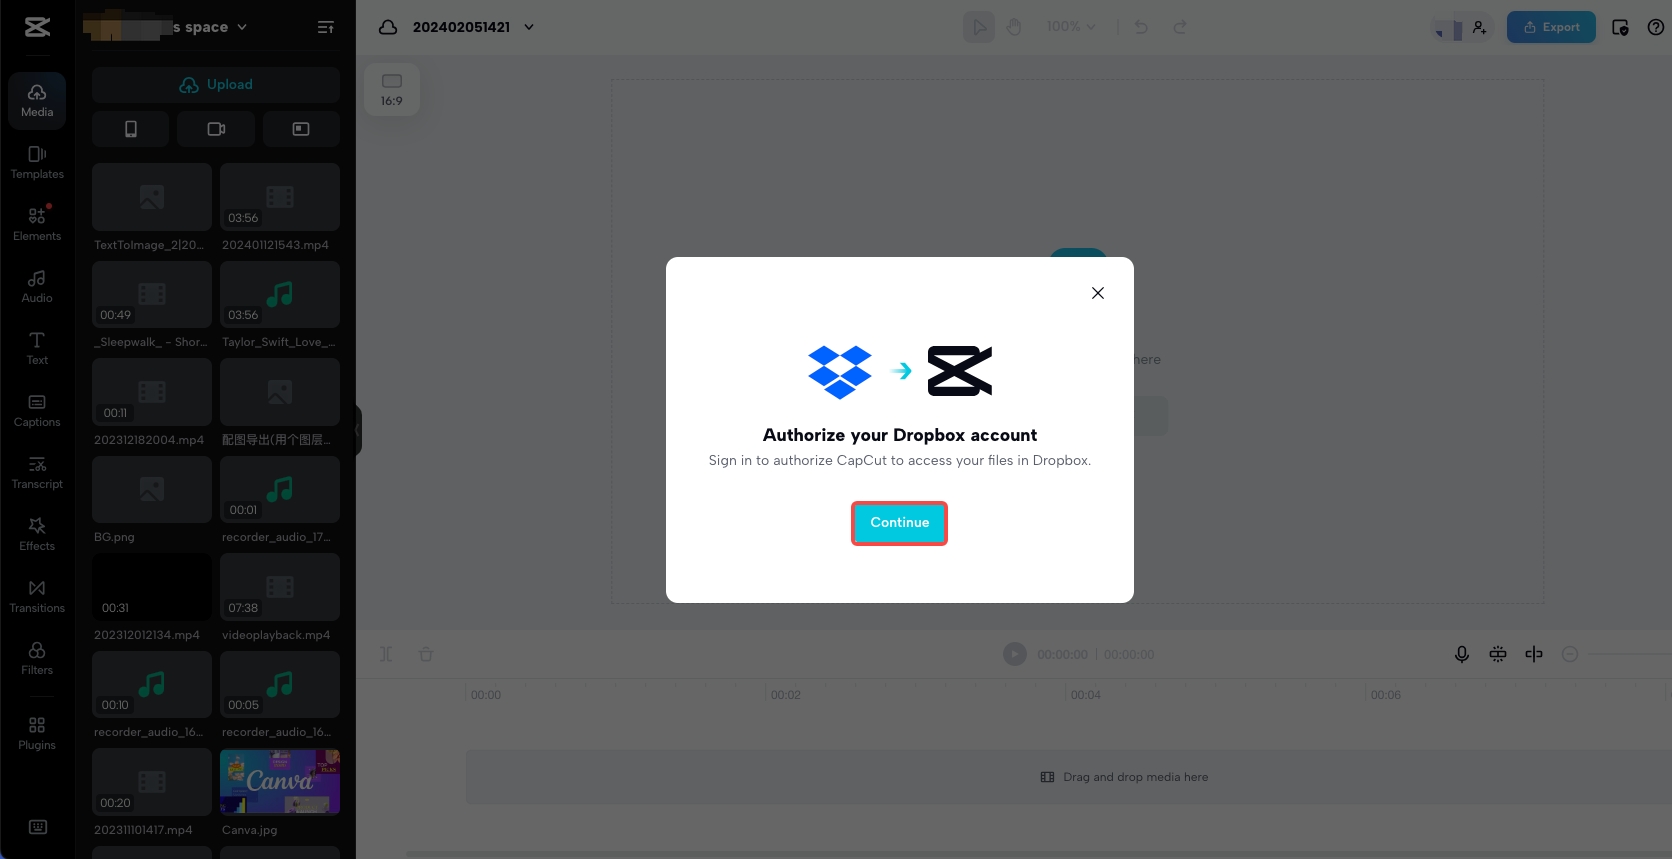 CapCut will request authorization to access your Dropbox files